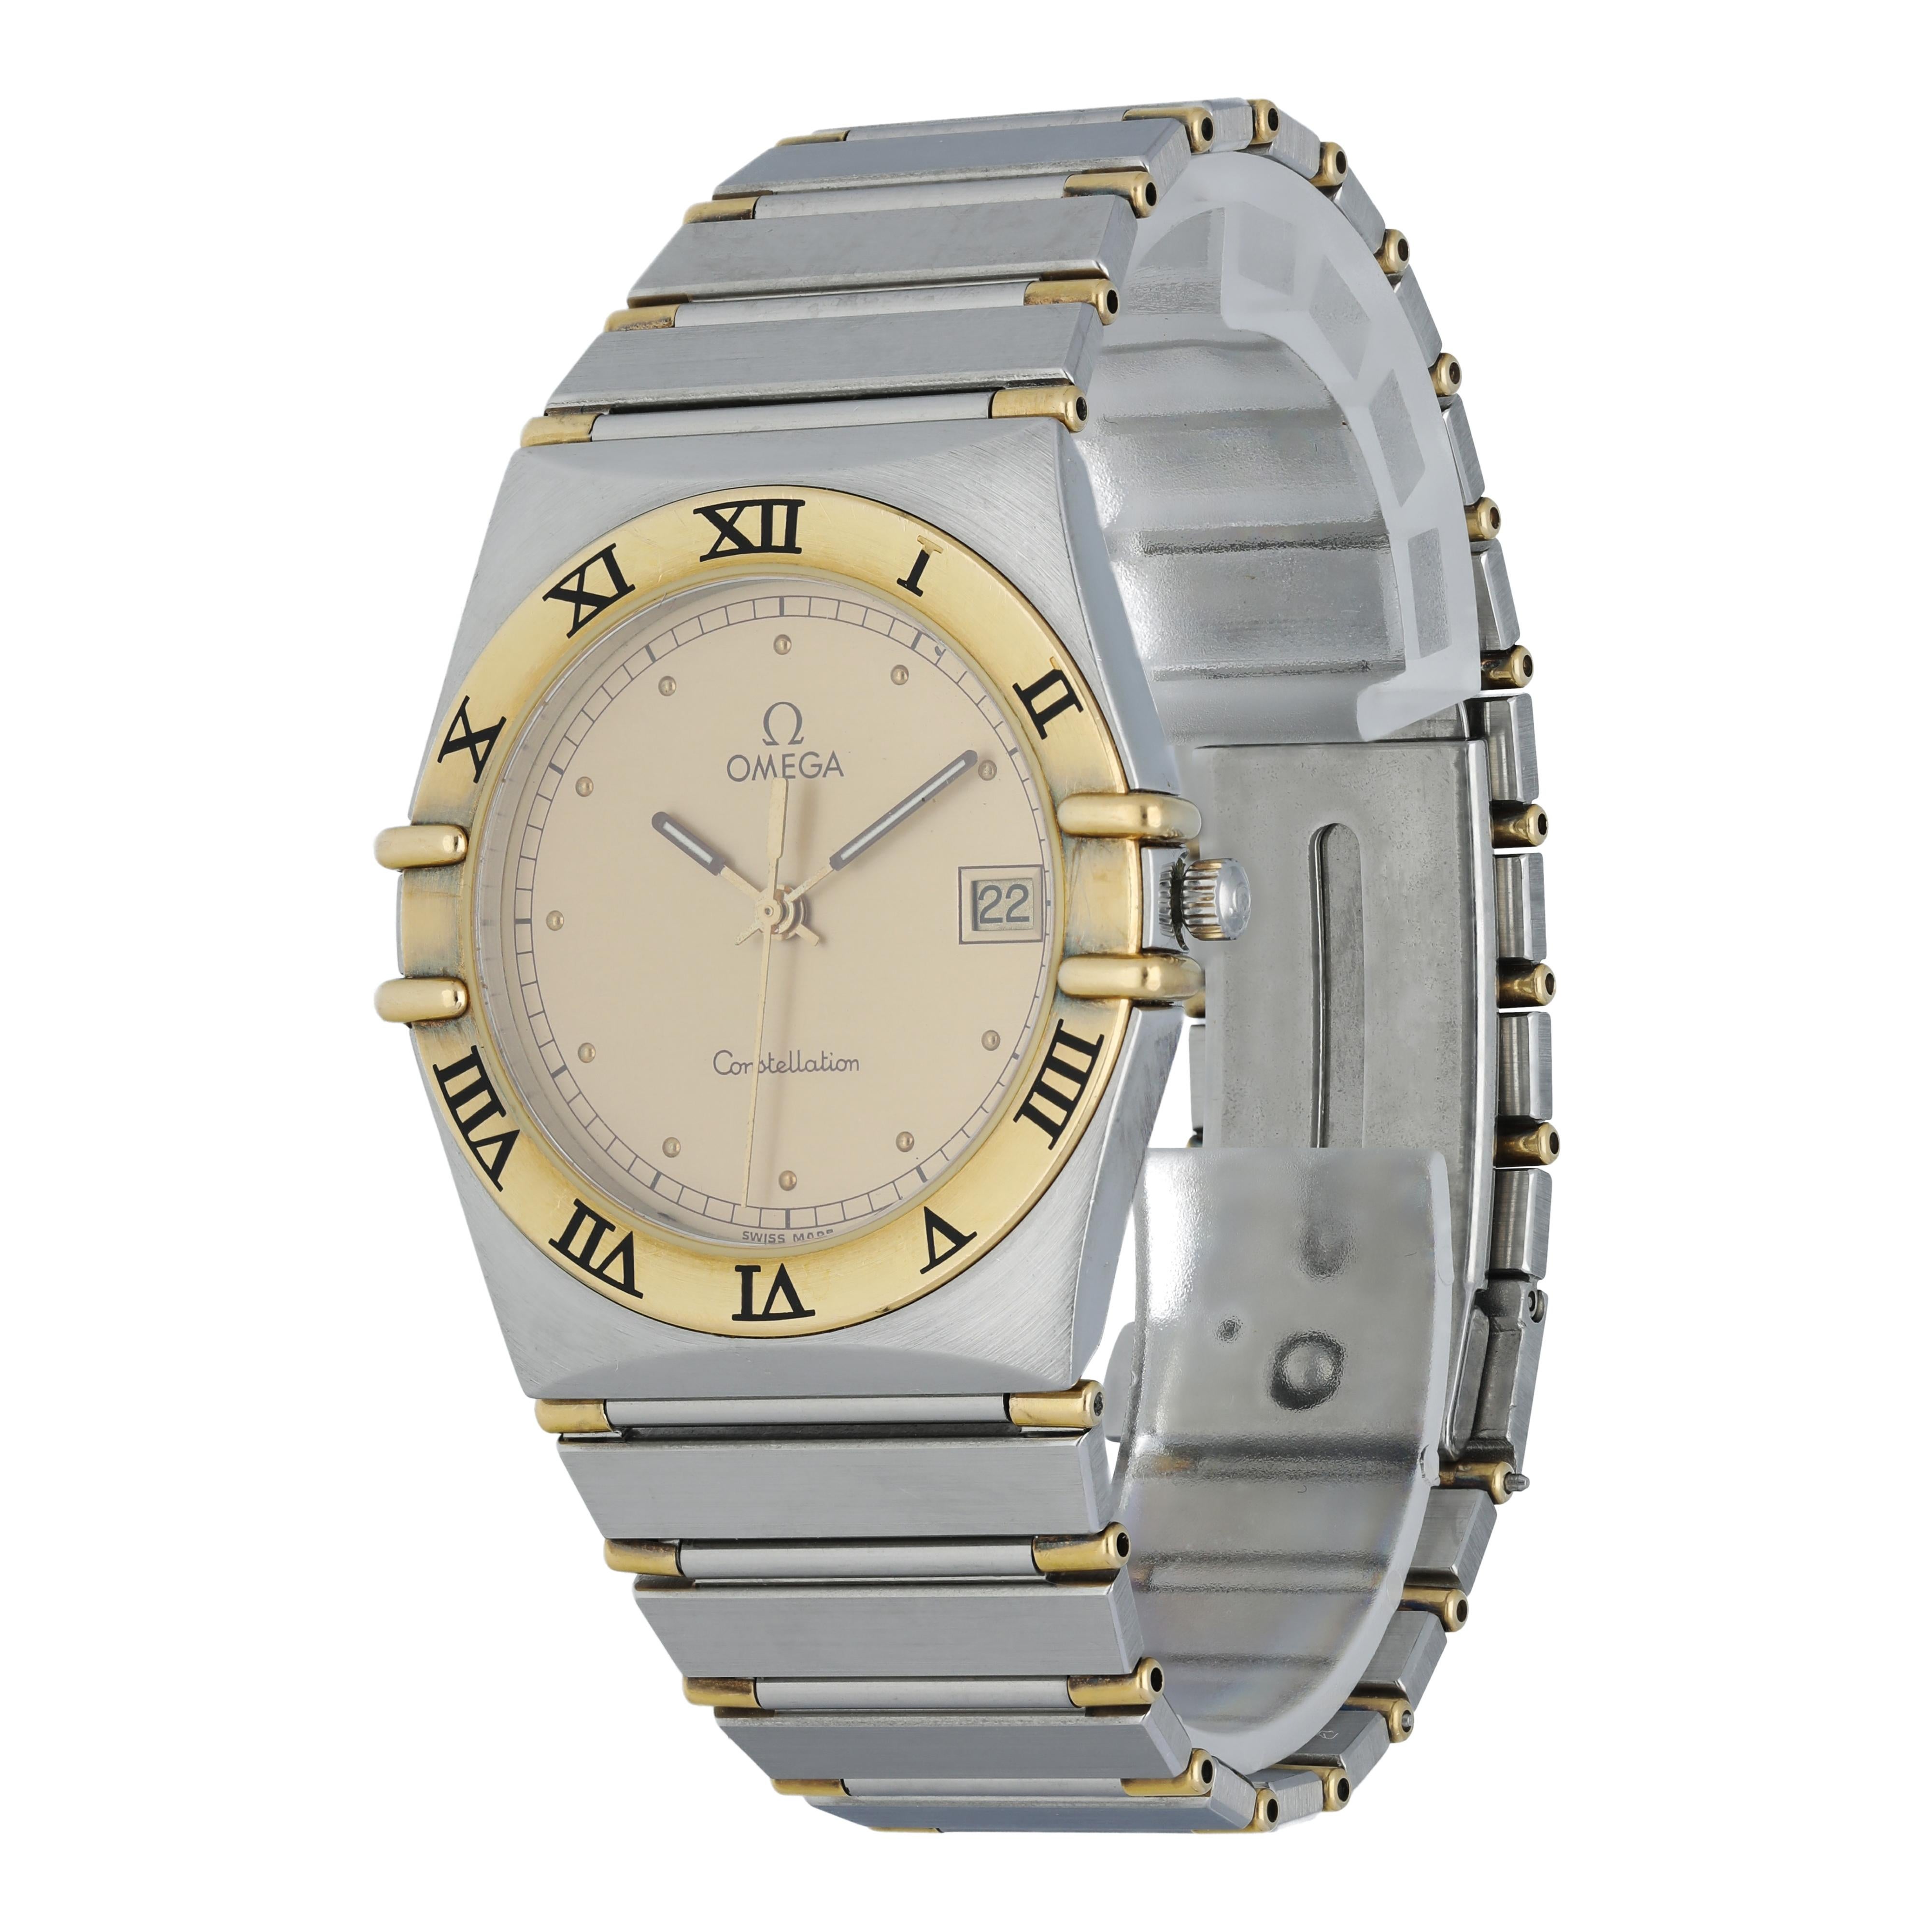 Omega Constellation Men's Watch
32mm Stainless Steel case. 
Yellow Gold Roman numeral bezel. 
Champagne dial with Luminous Steel hands and dot hour markers. 
Minute markers on the outer dial. 
Date display at the 3 o'clock position. 
Stainless Steel